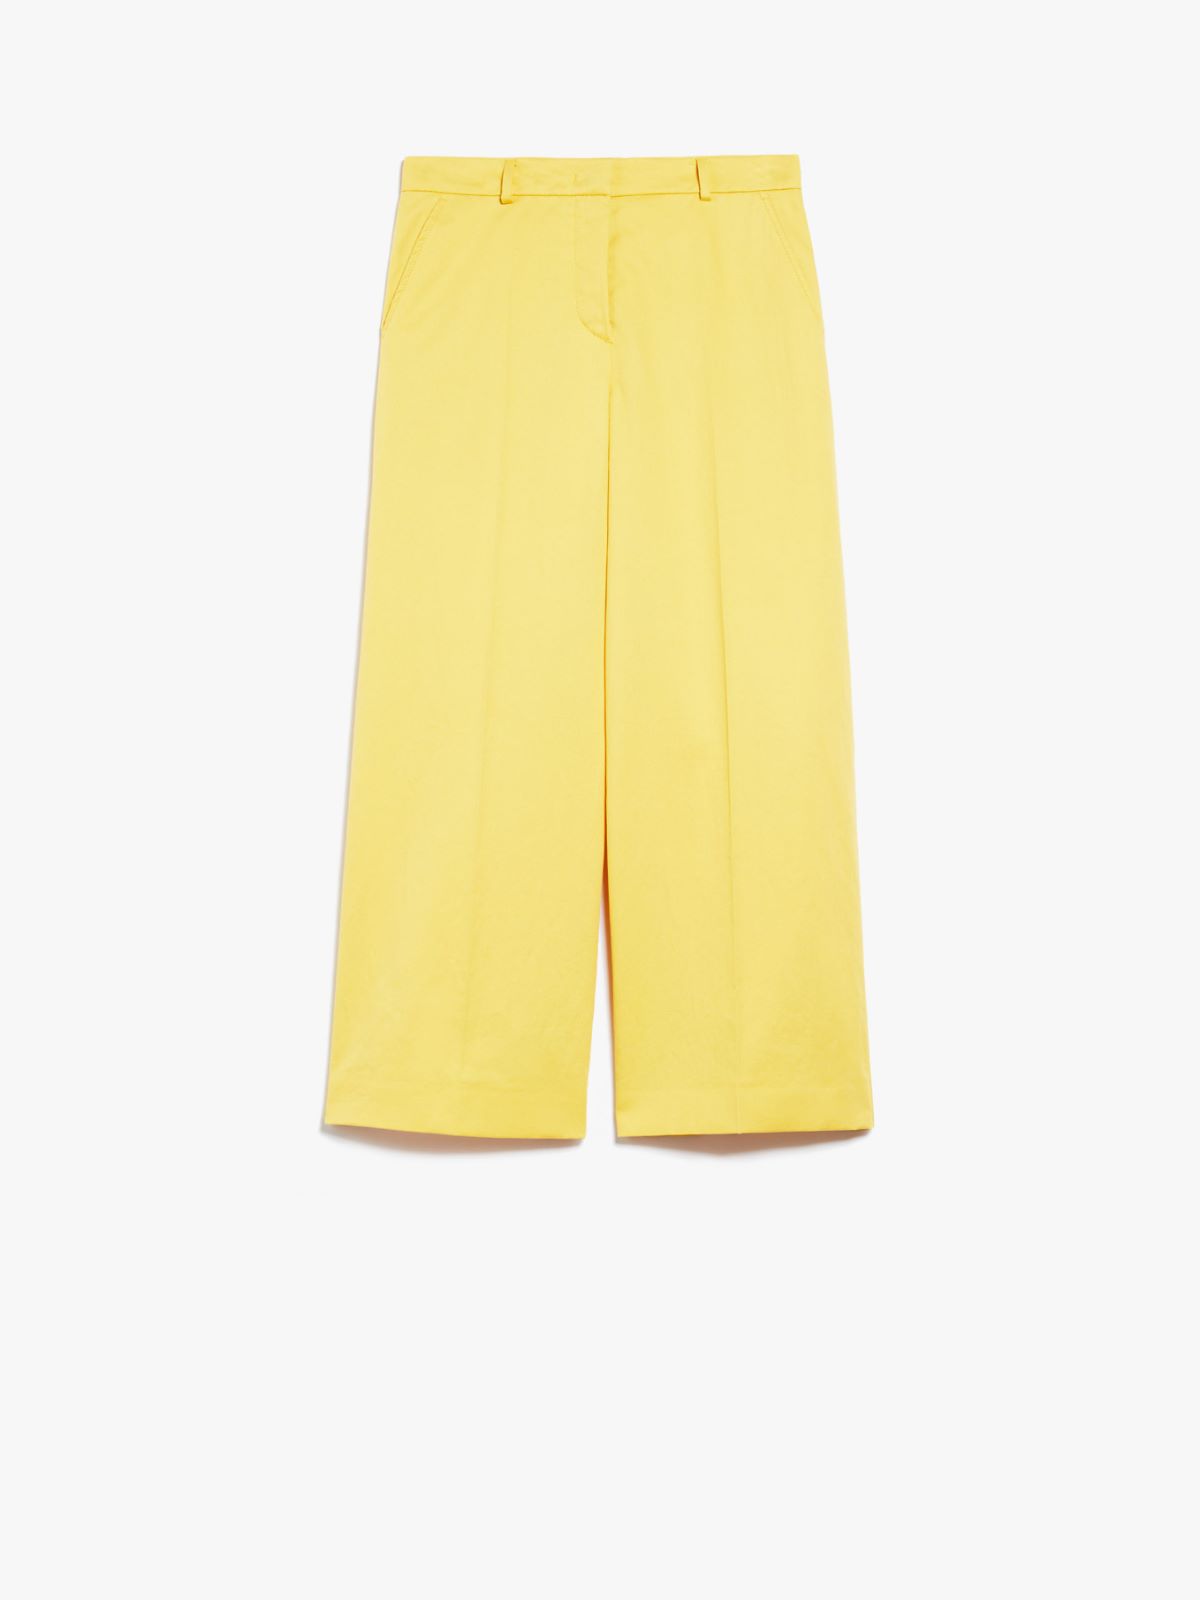 Cotton and linen trousers - BRIGHT YELLOW - Weekend Max Mara - 5